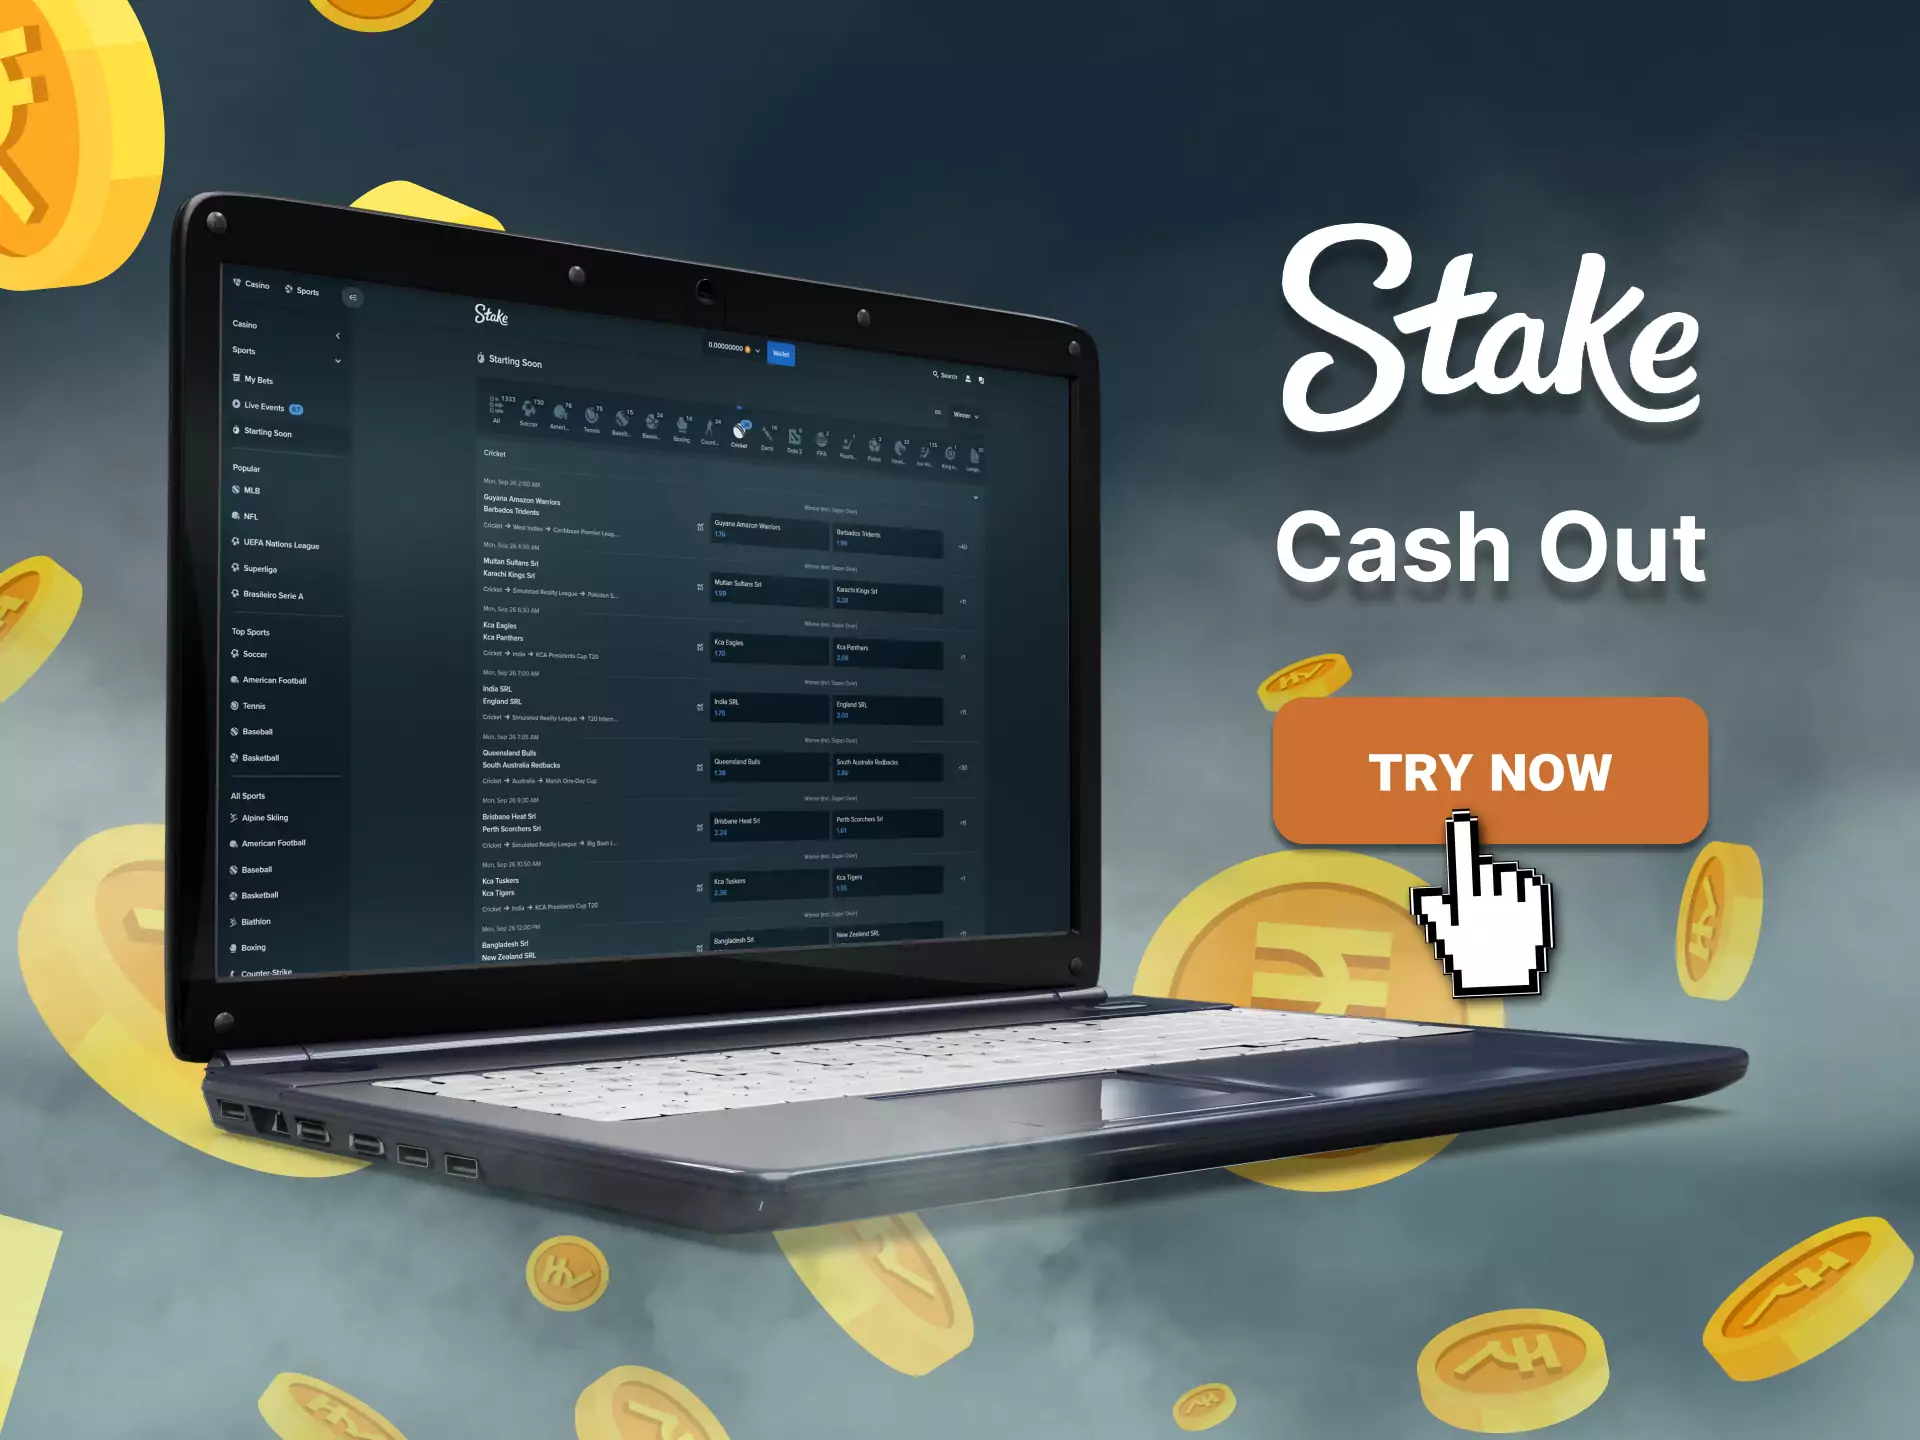 After you win on Stake, cash-out money with any relevant method.